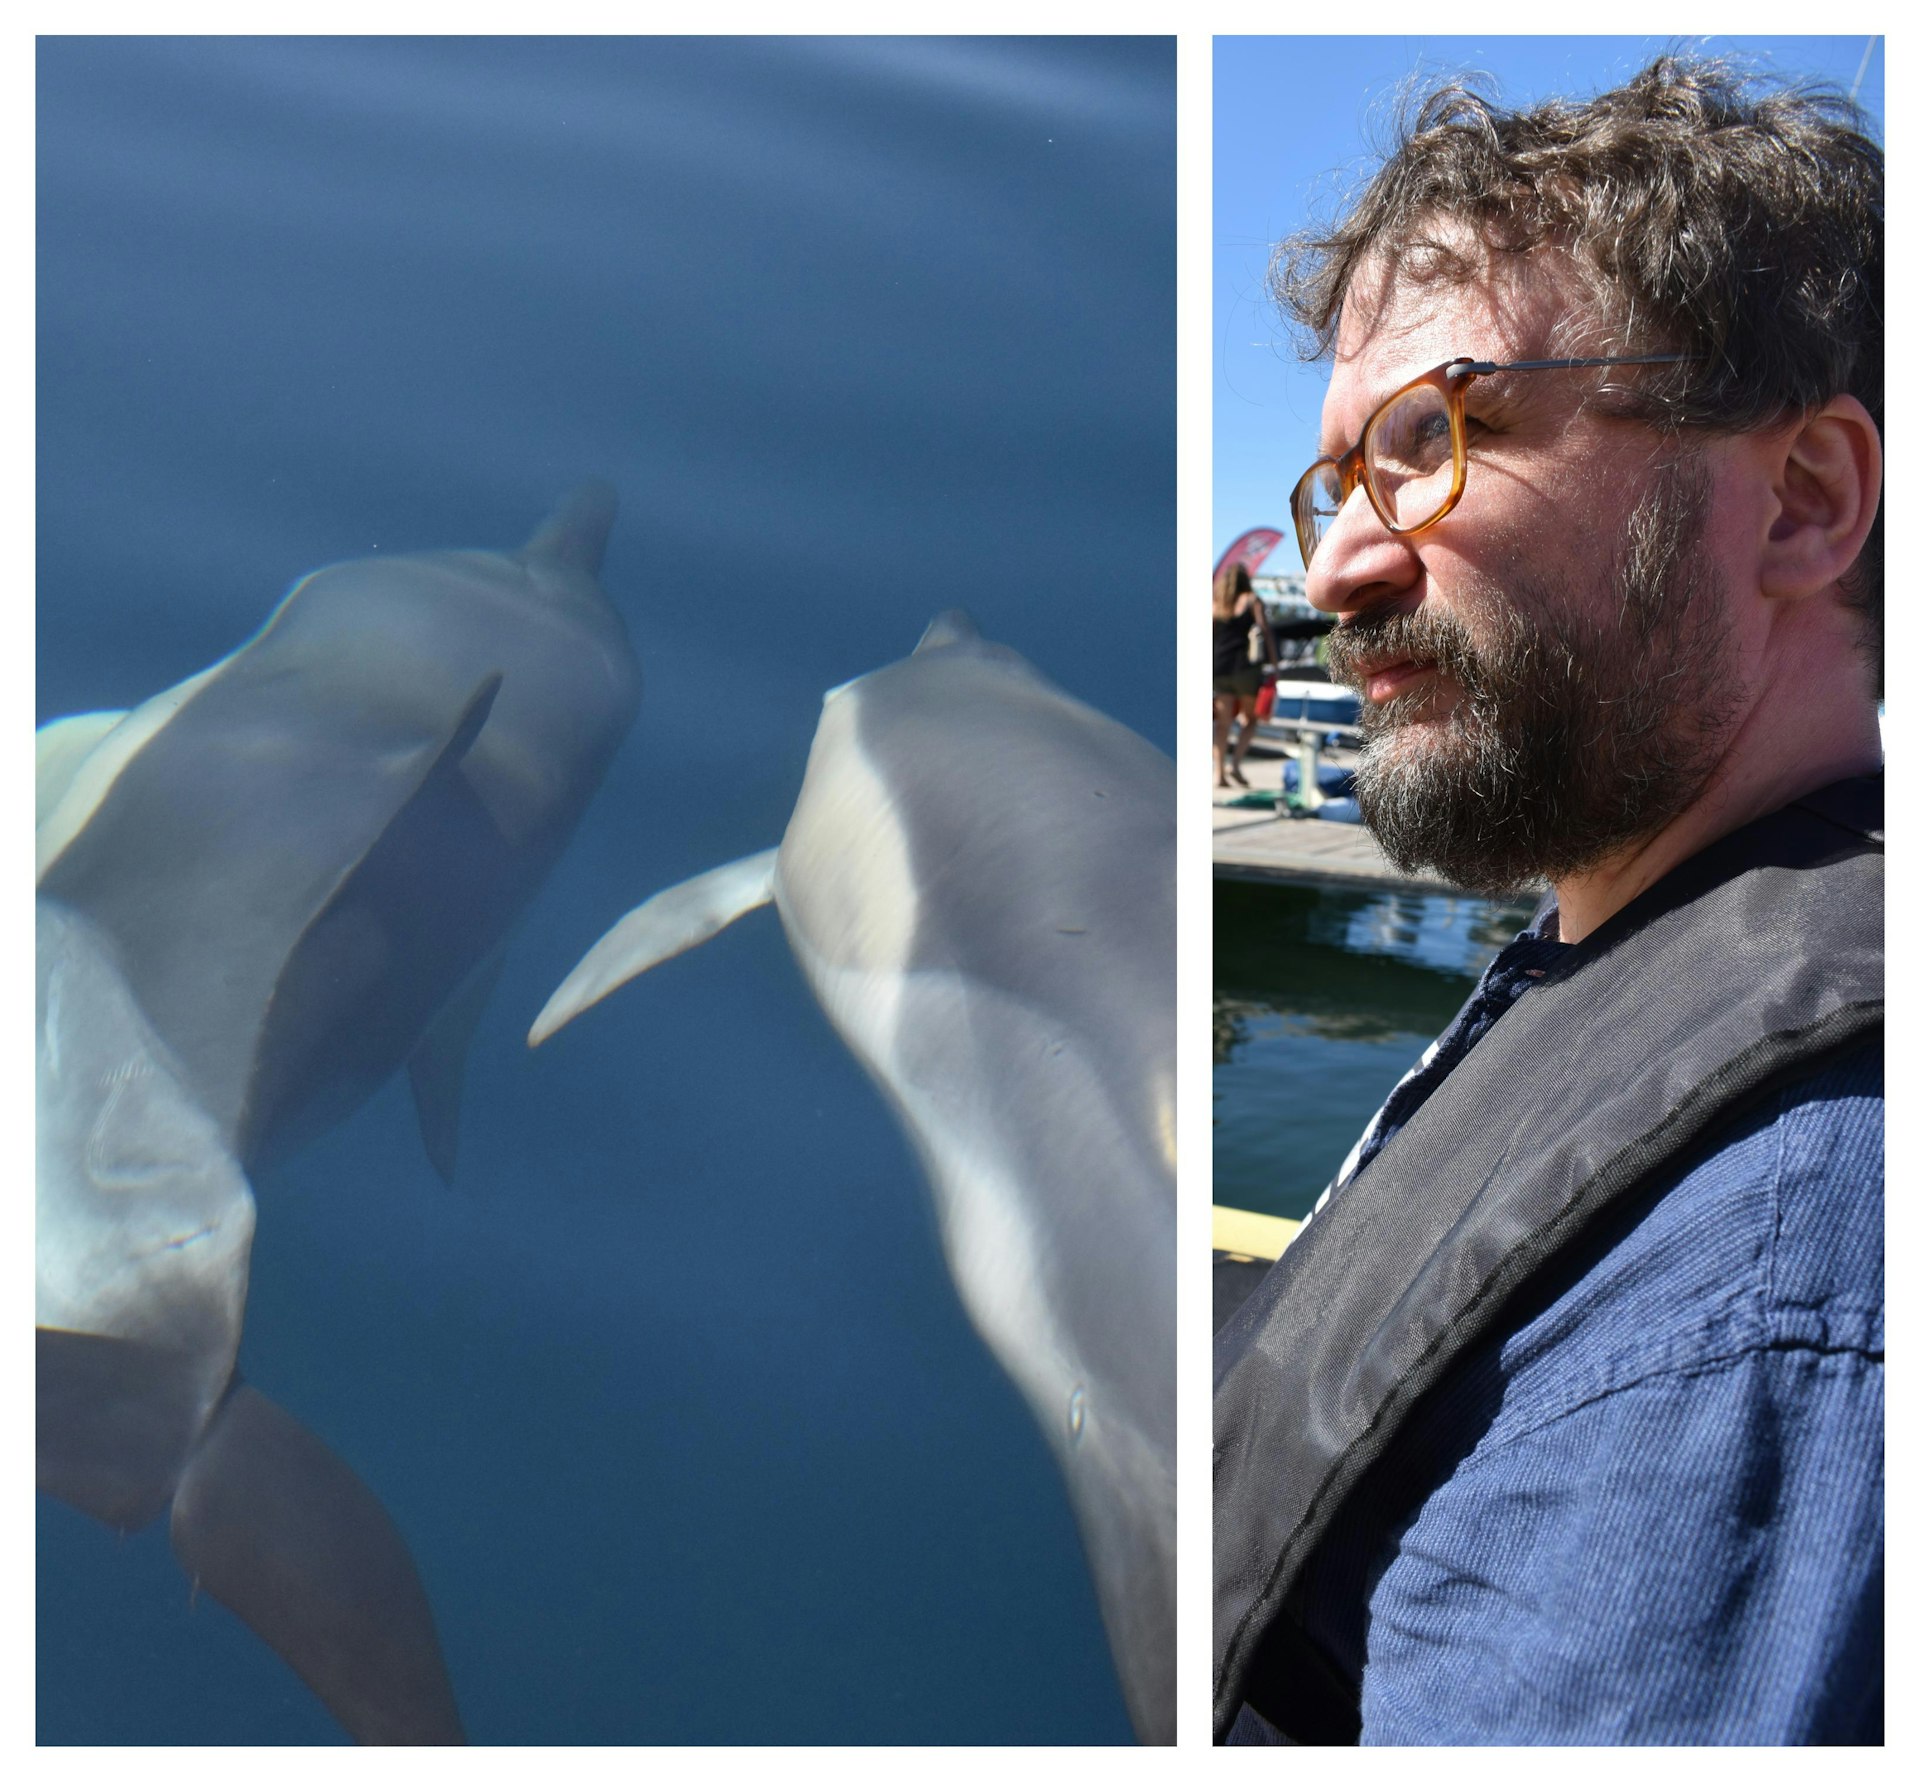 On the left, two dolphins swim in the water. On the right a close-up of the author in a boat wearing a life jacket.